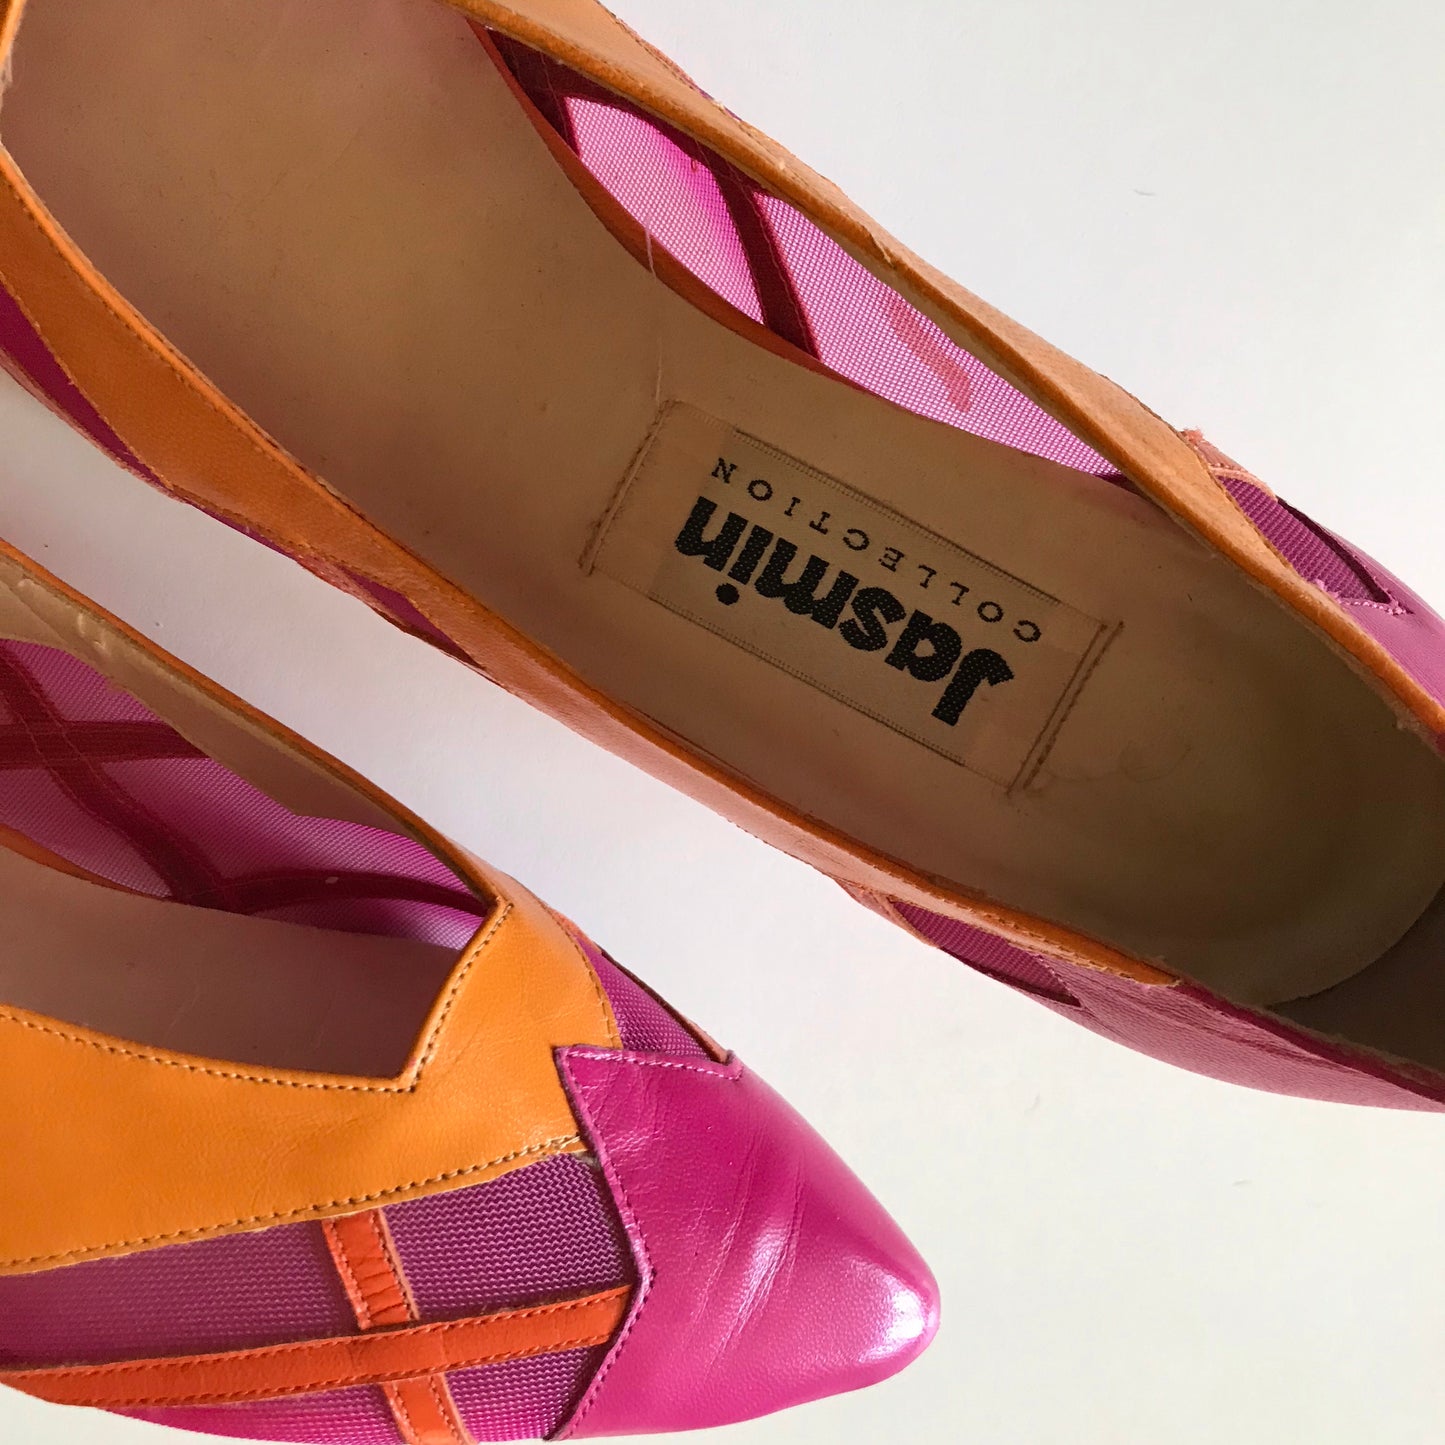 Bright Orange and Pink Wedge Heel Shoes Flats circa 1980s 7